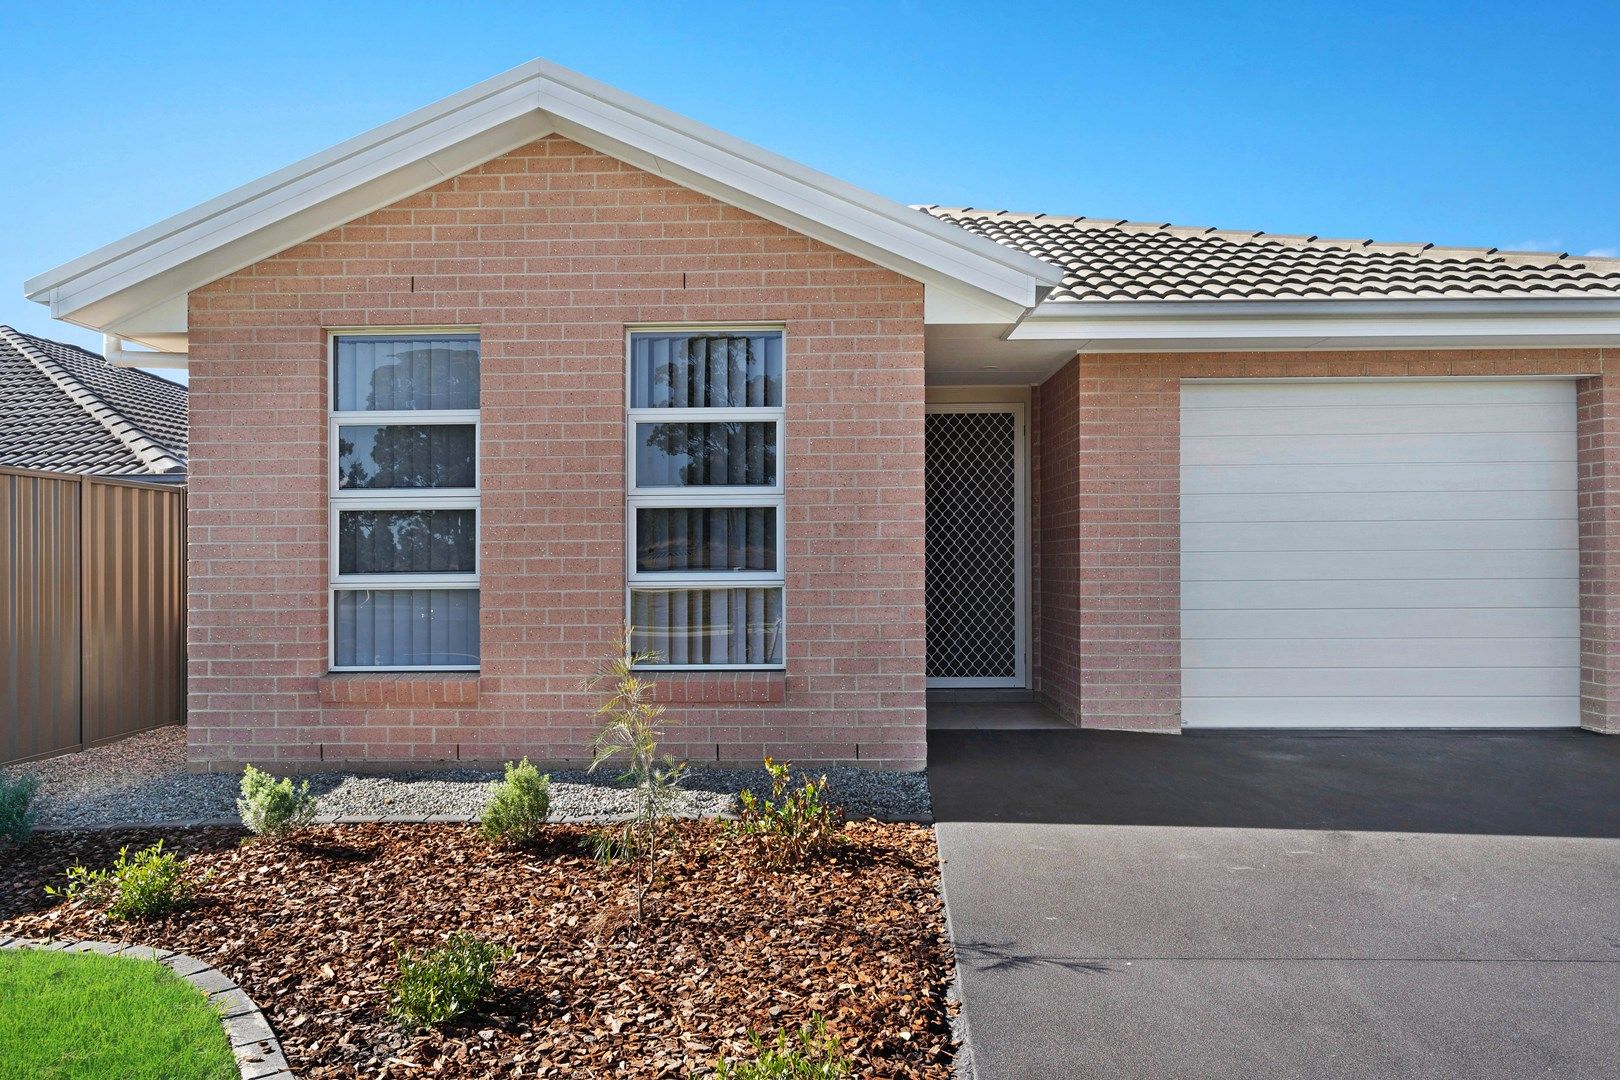 3 bedrooms House in 2/20 Glen Ayr Avenue CLIFTLEIGH NSW, 2321